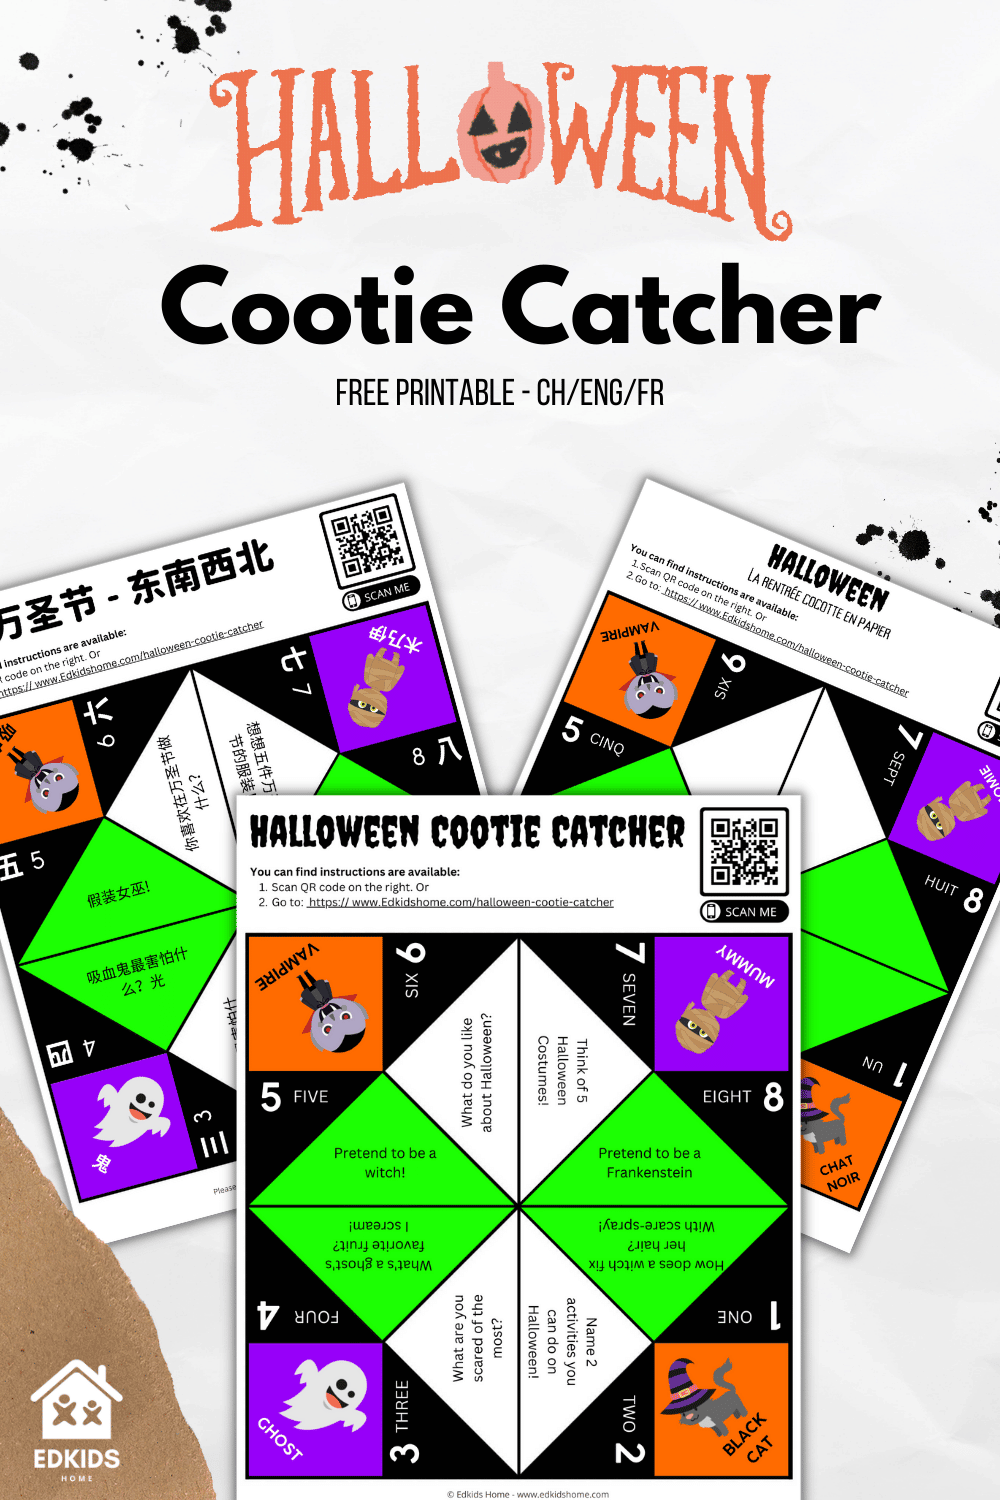 Halloween Cootie Catcher - Free printable - Chinese, English, French 